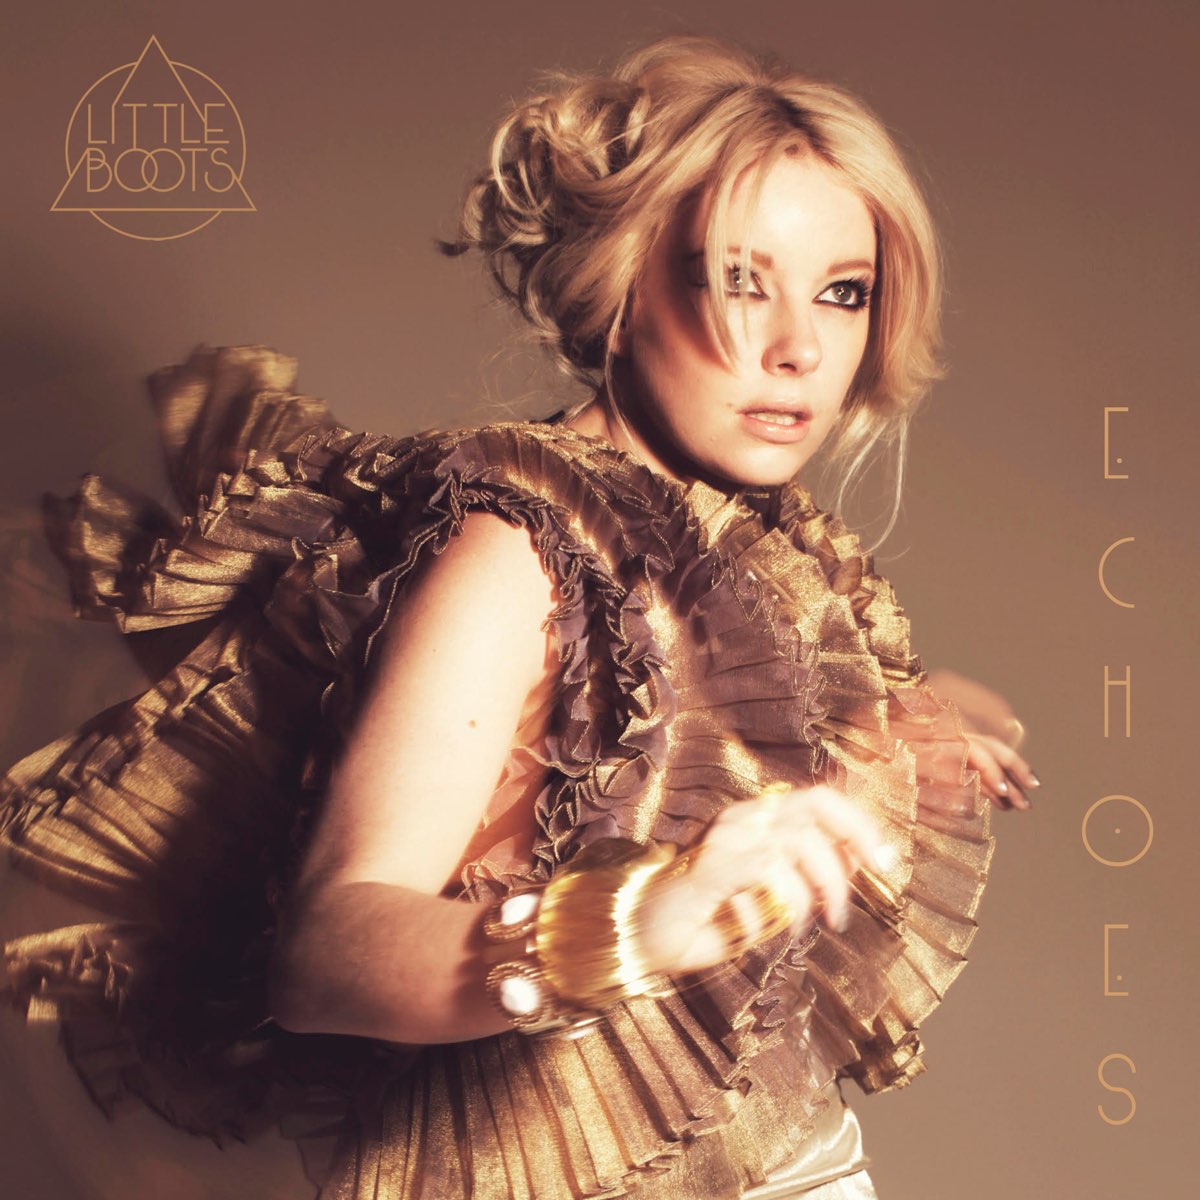 Little Boots — Echoes (Demo) cover artwork